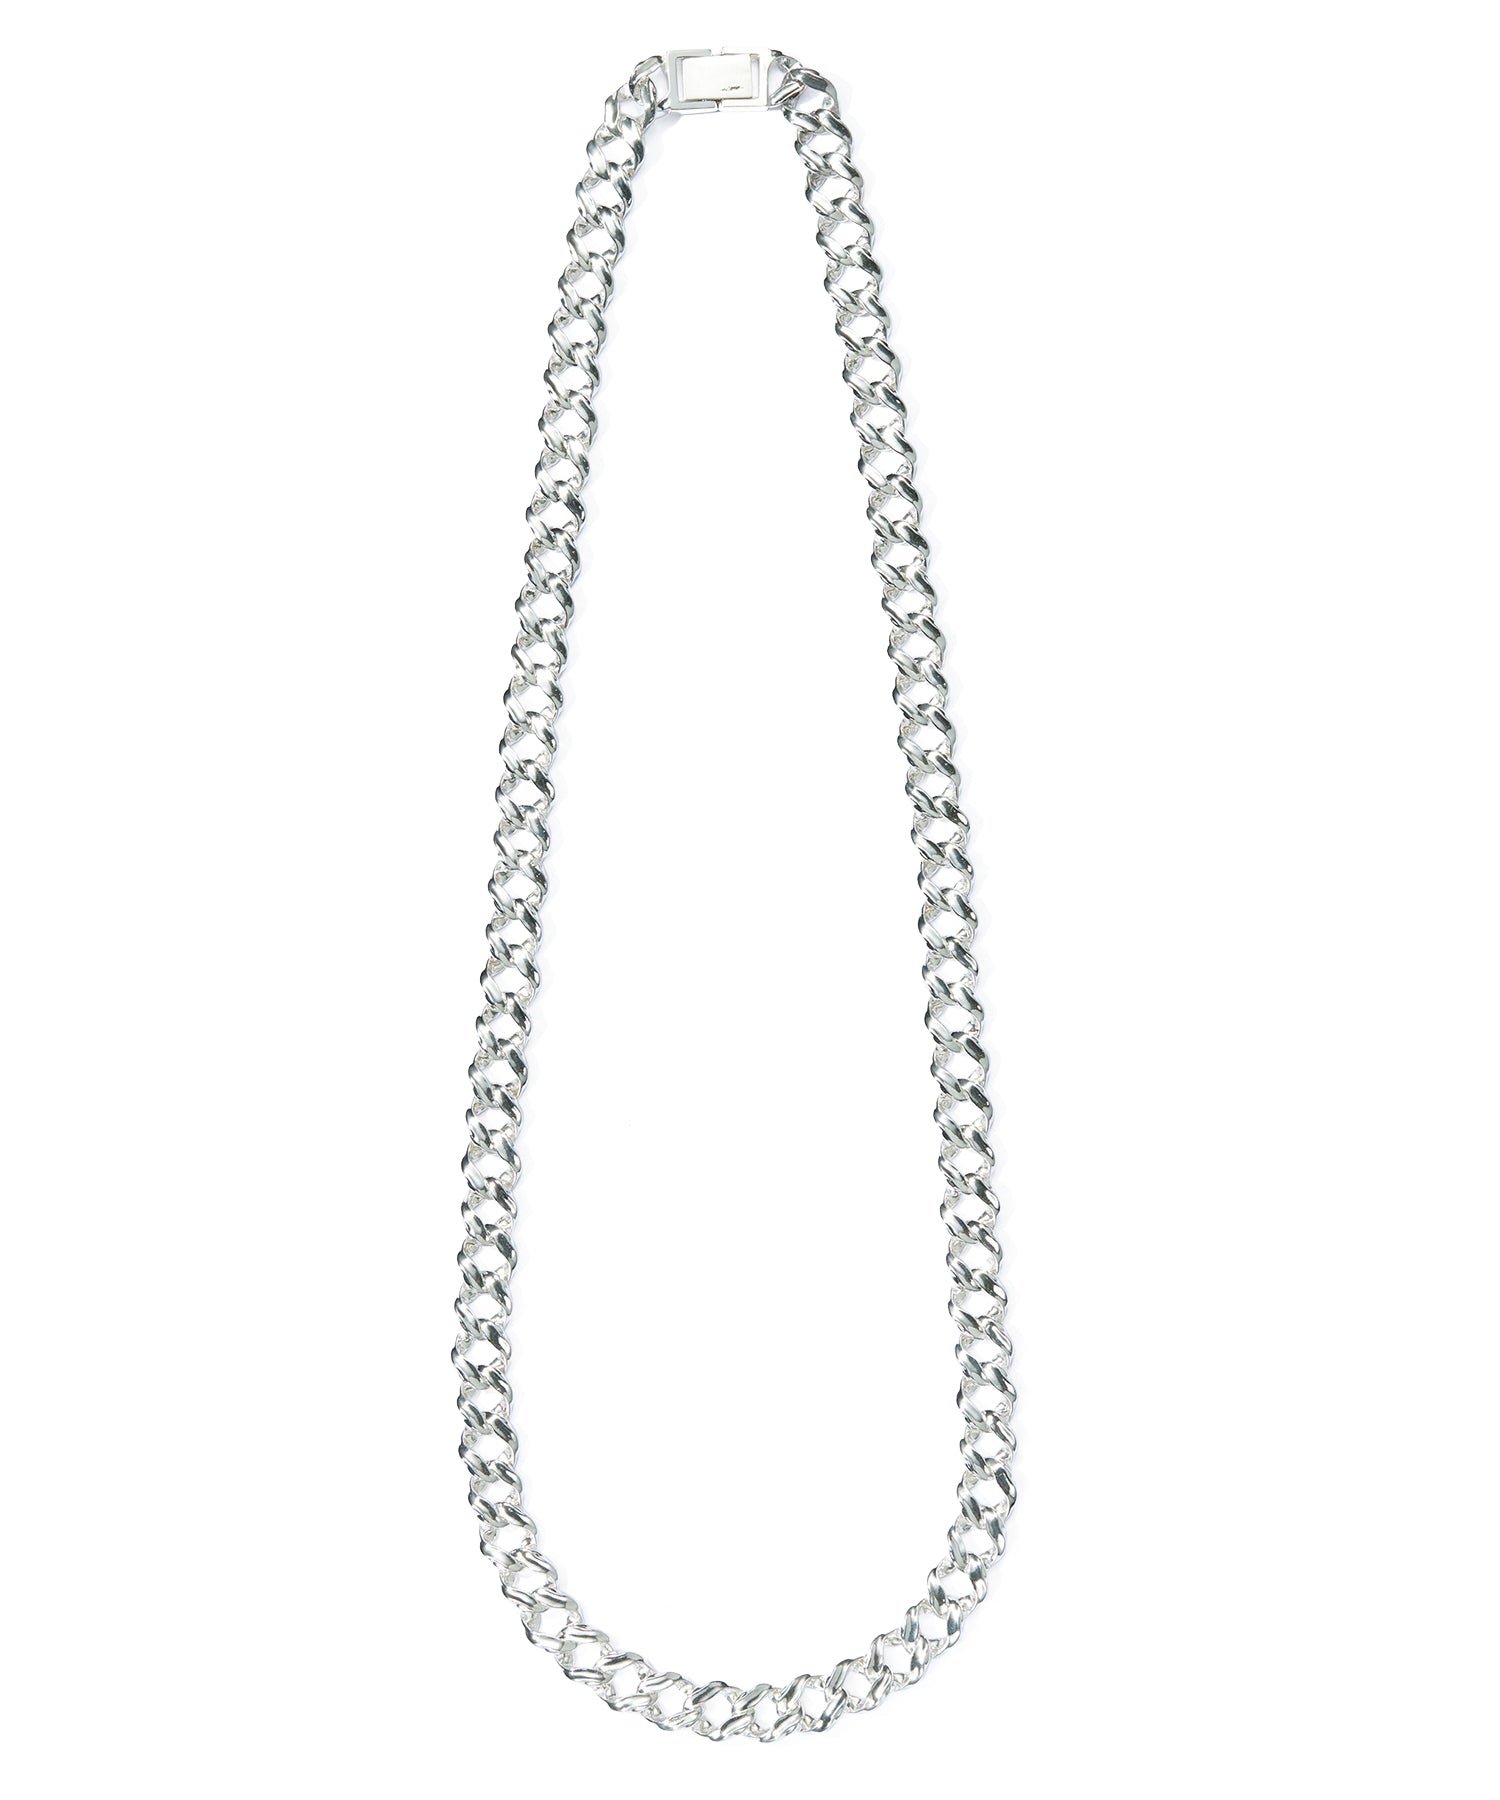 LINK CHAIN SKIN SILVER NECKLACE LONG